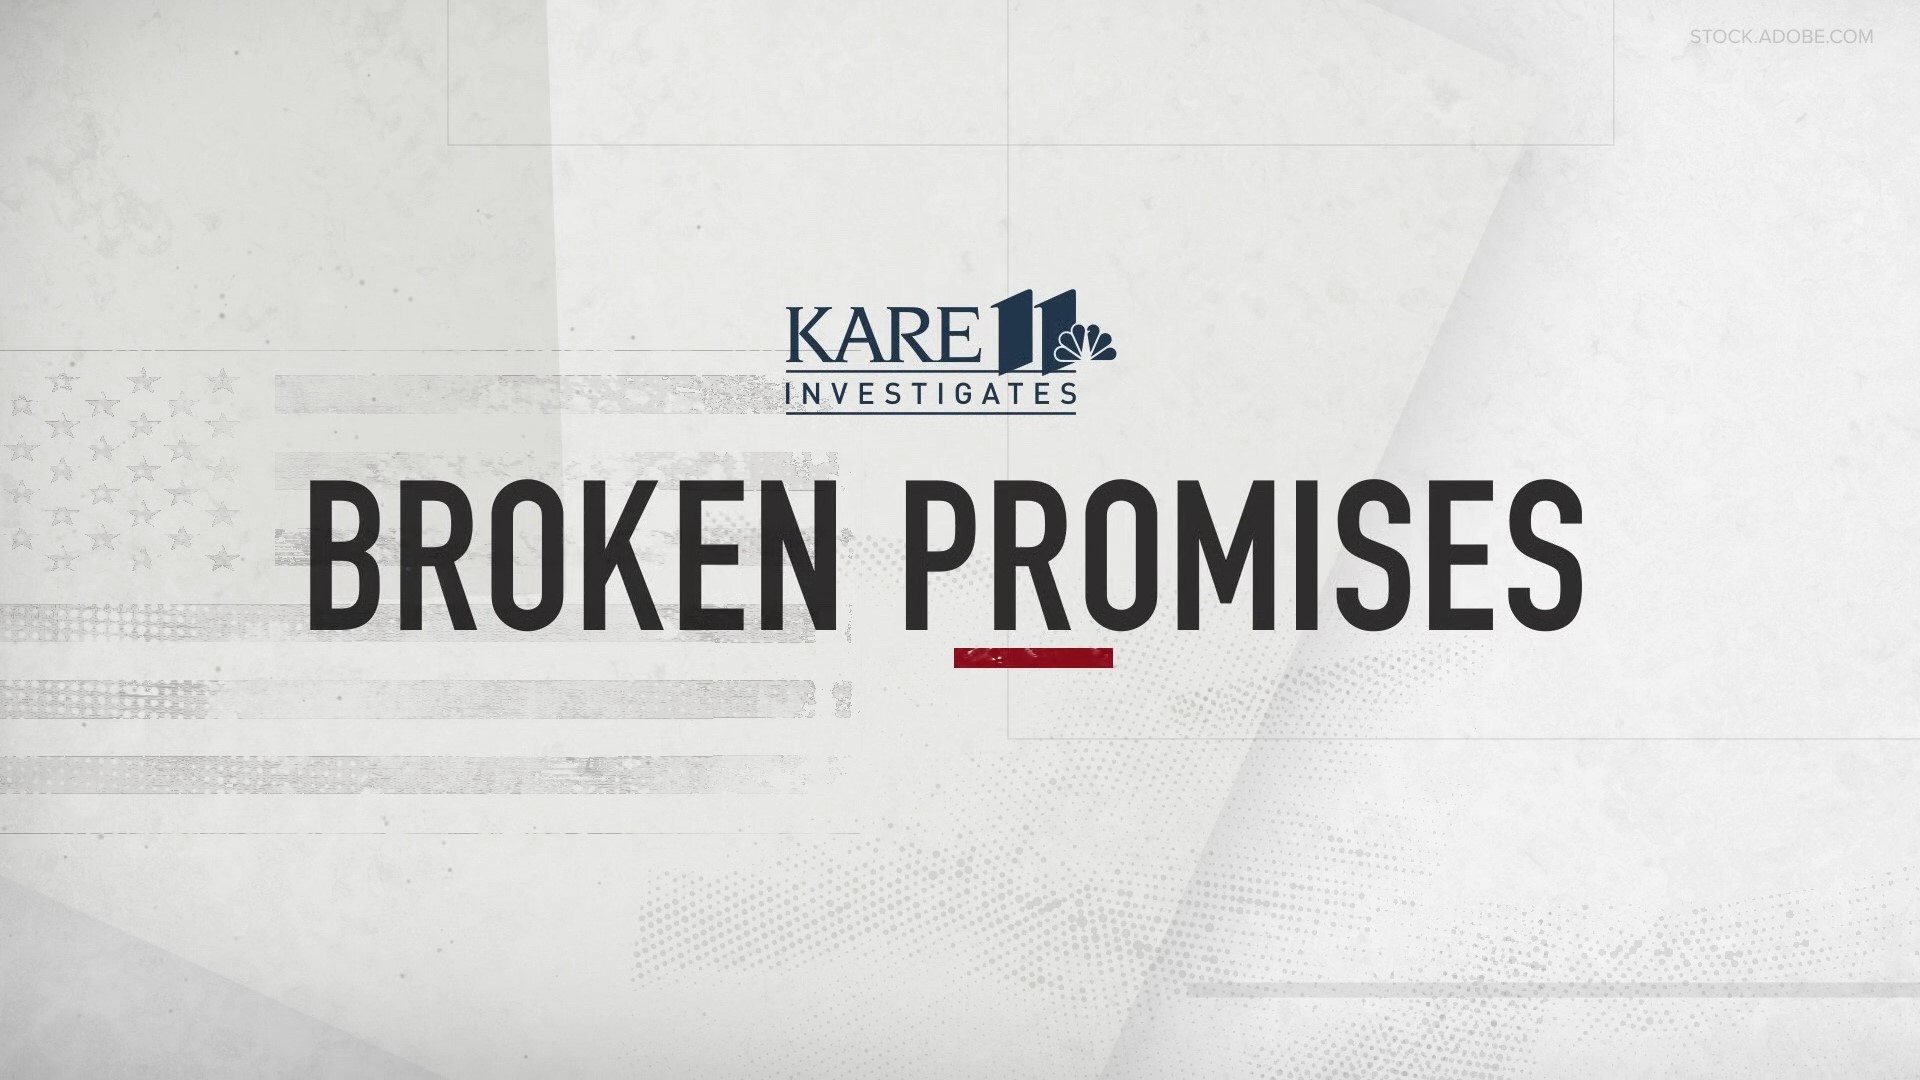 A KARE 11 investigation exposes Veterans being misdiagnosed, denied medical care and disability benefits, while VA misleads members of Congress.